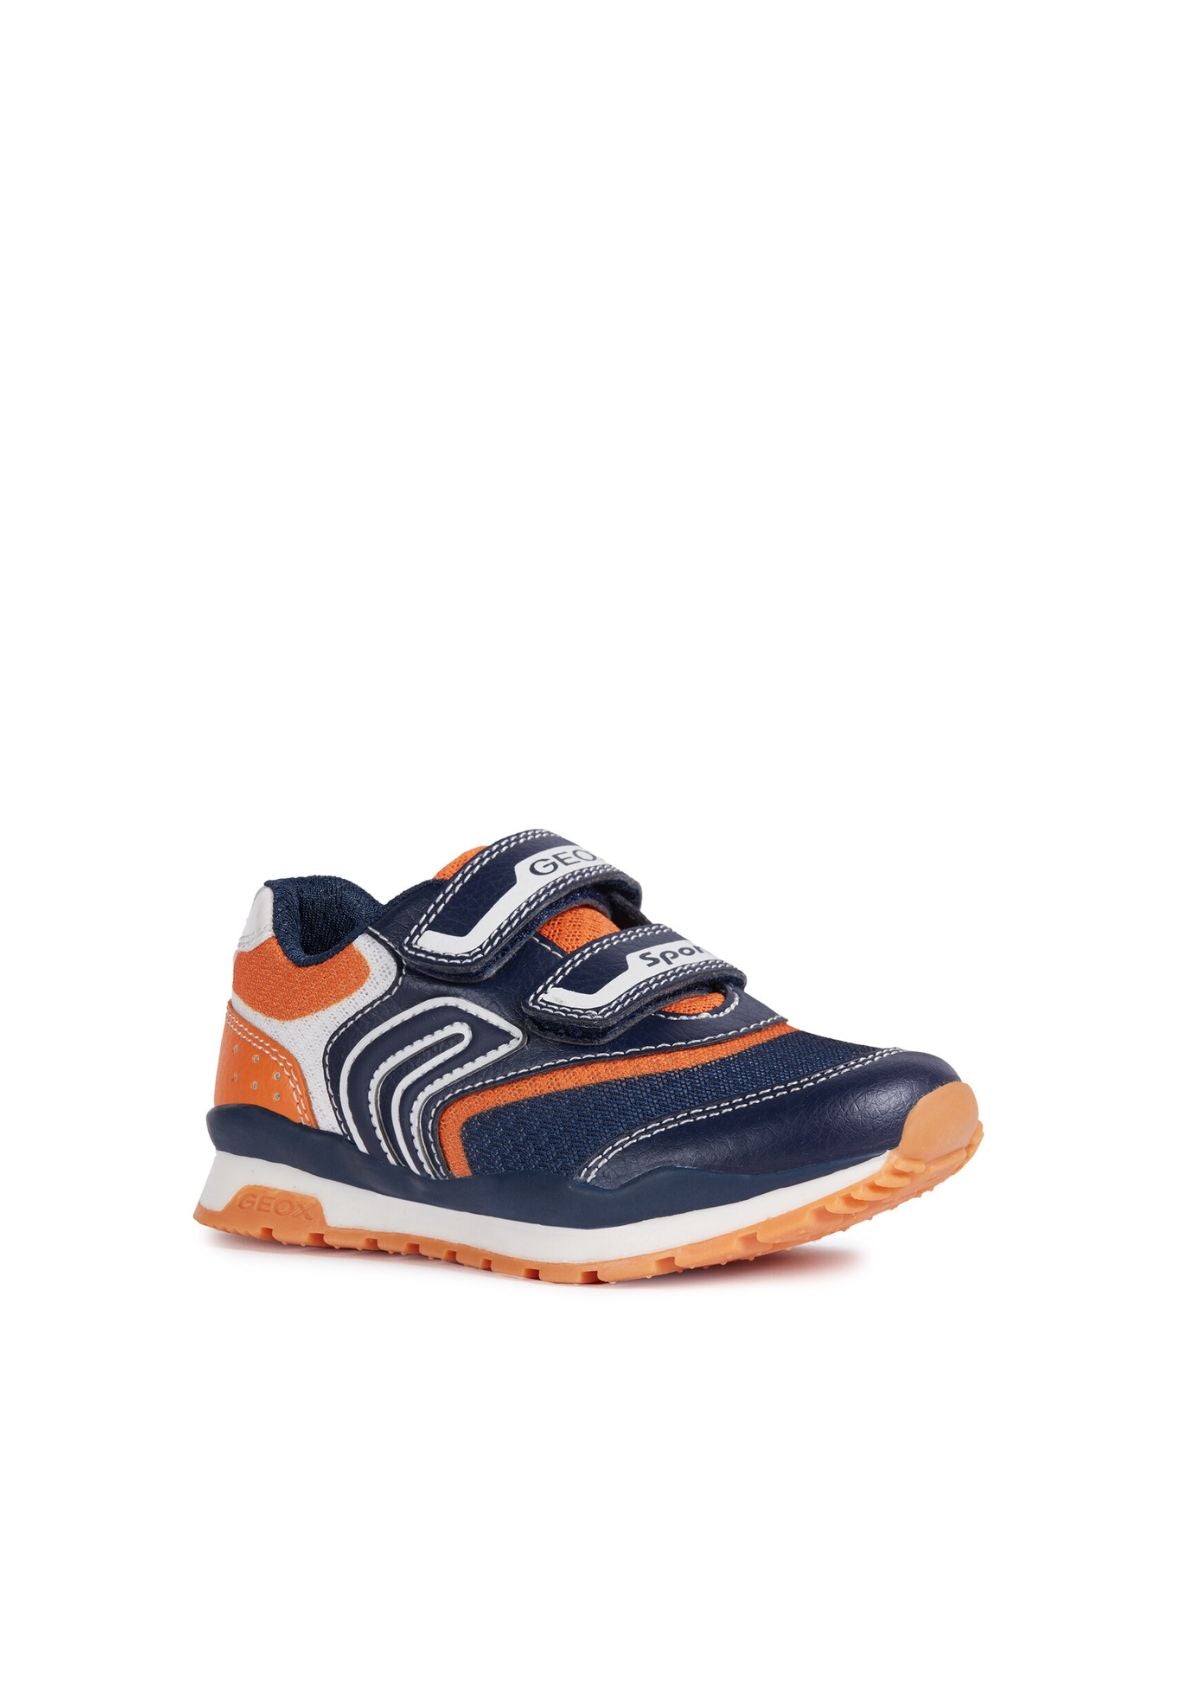 Geox Junior Boys Trainers PAVEL Navy Orange side front